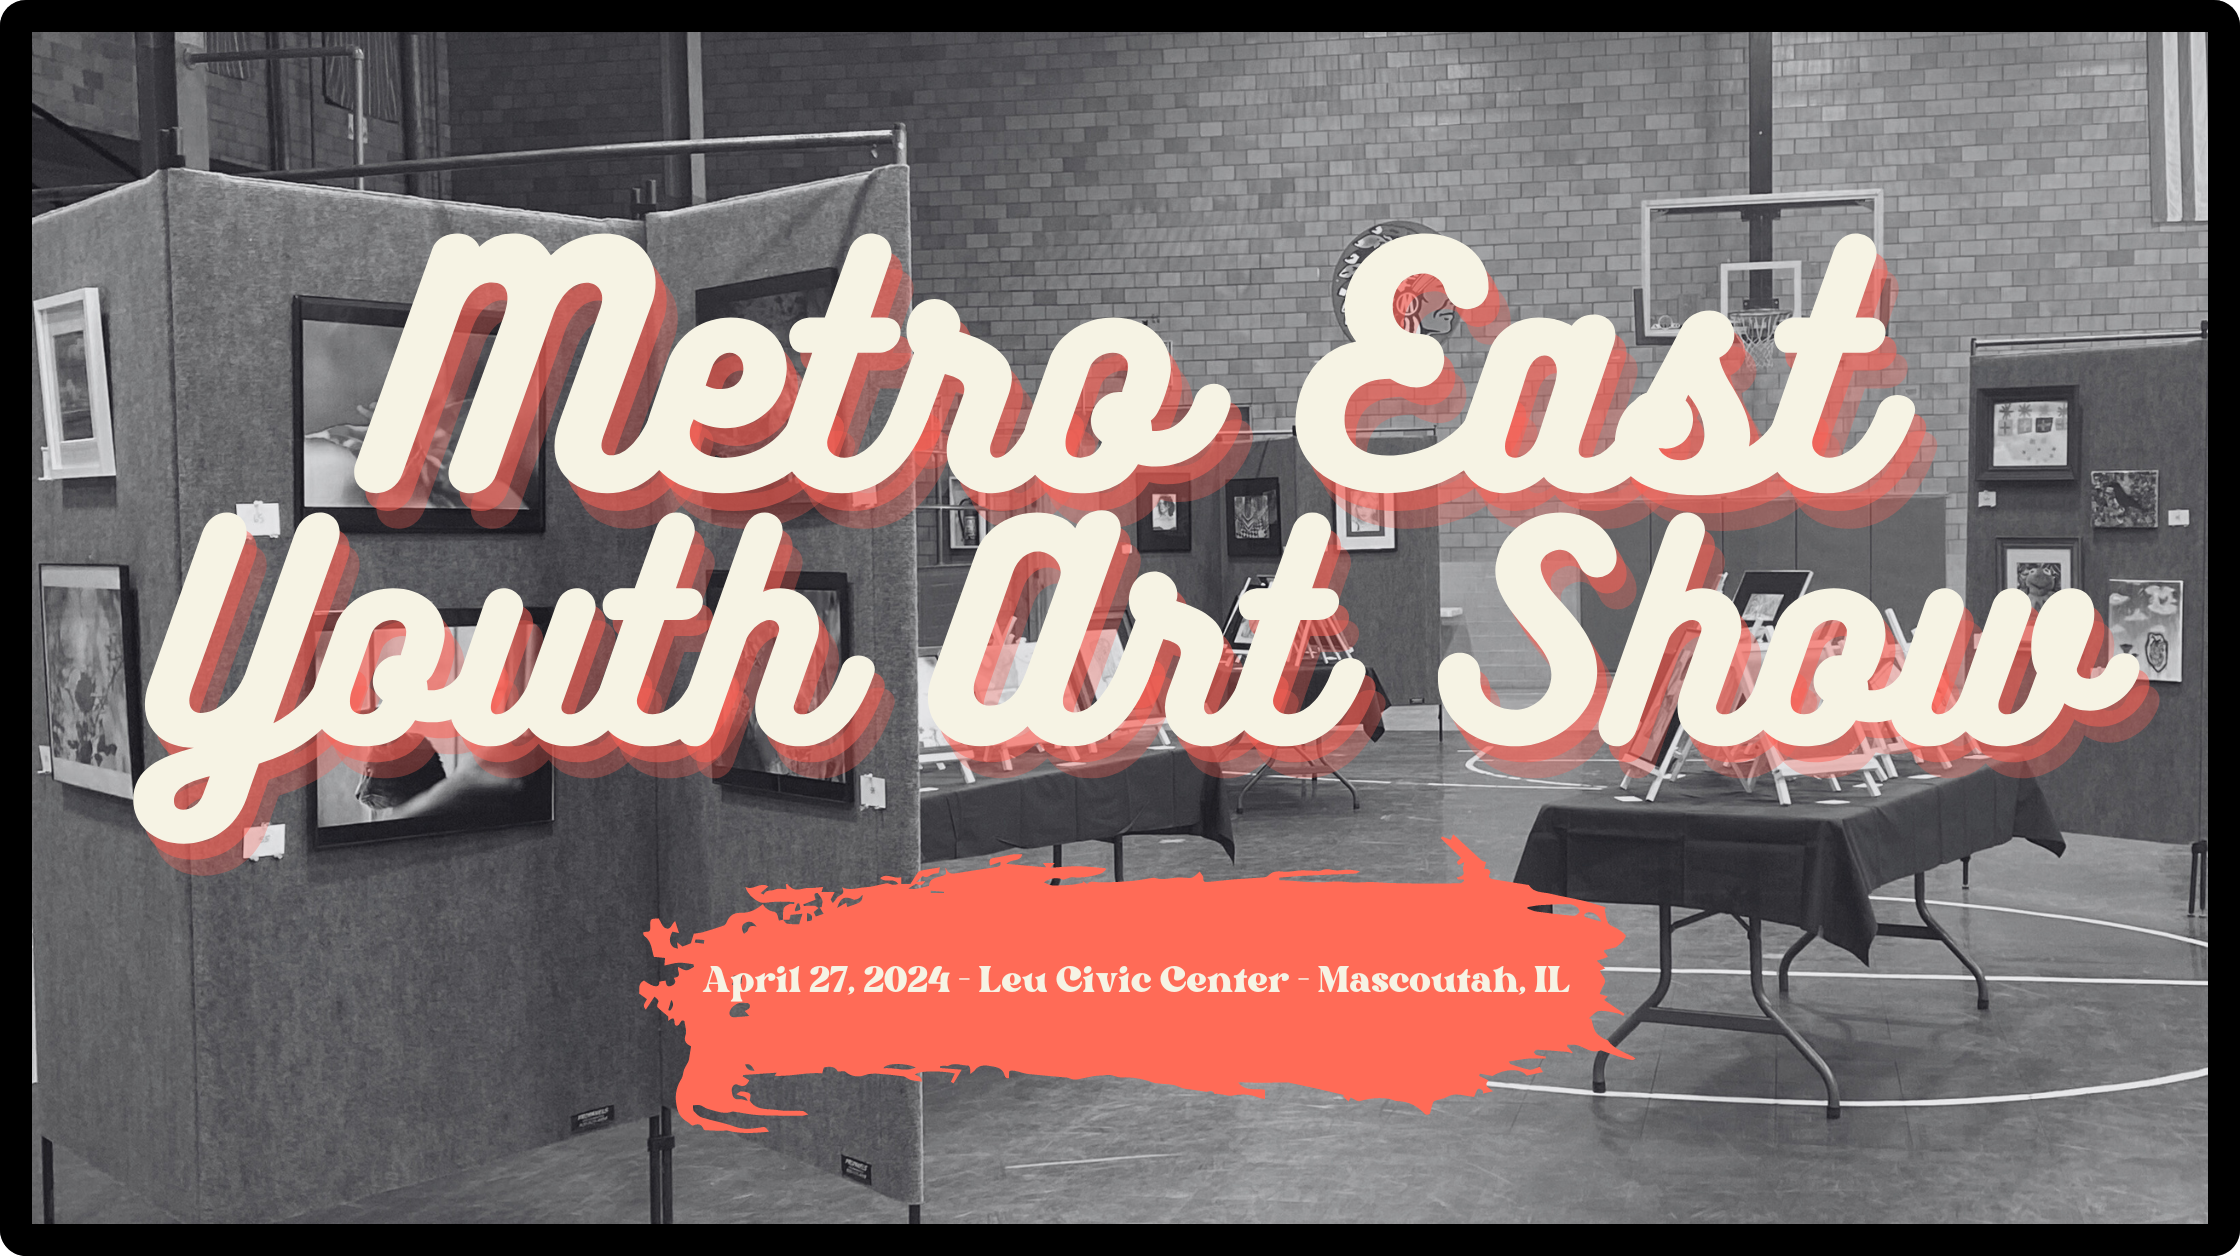 Metro East Youth Art Show